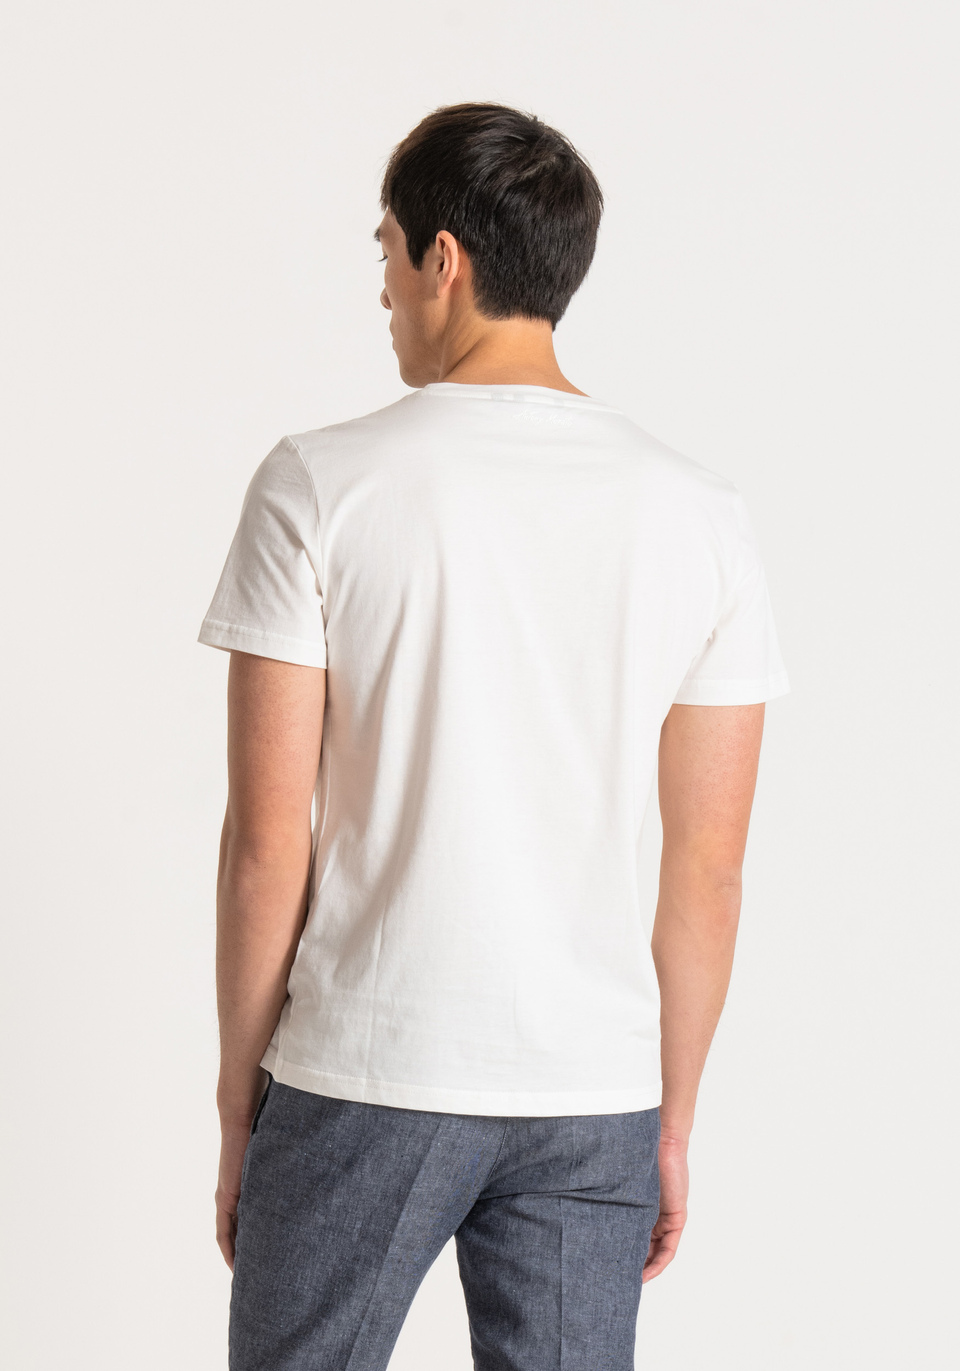 SLIM-FIT T-SHIRT IN 100% COTTON WITH A PARROT PRINT - Antony Morato Online Shop